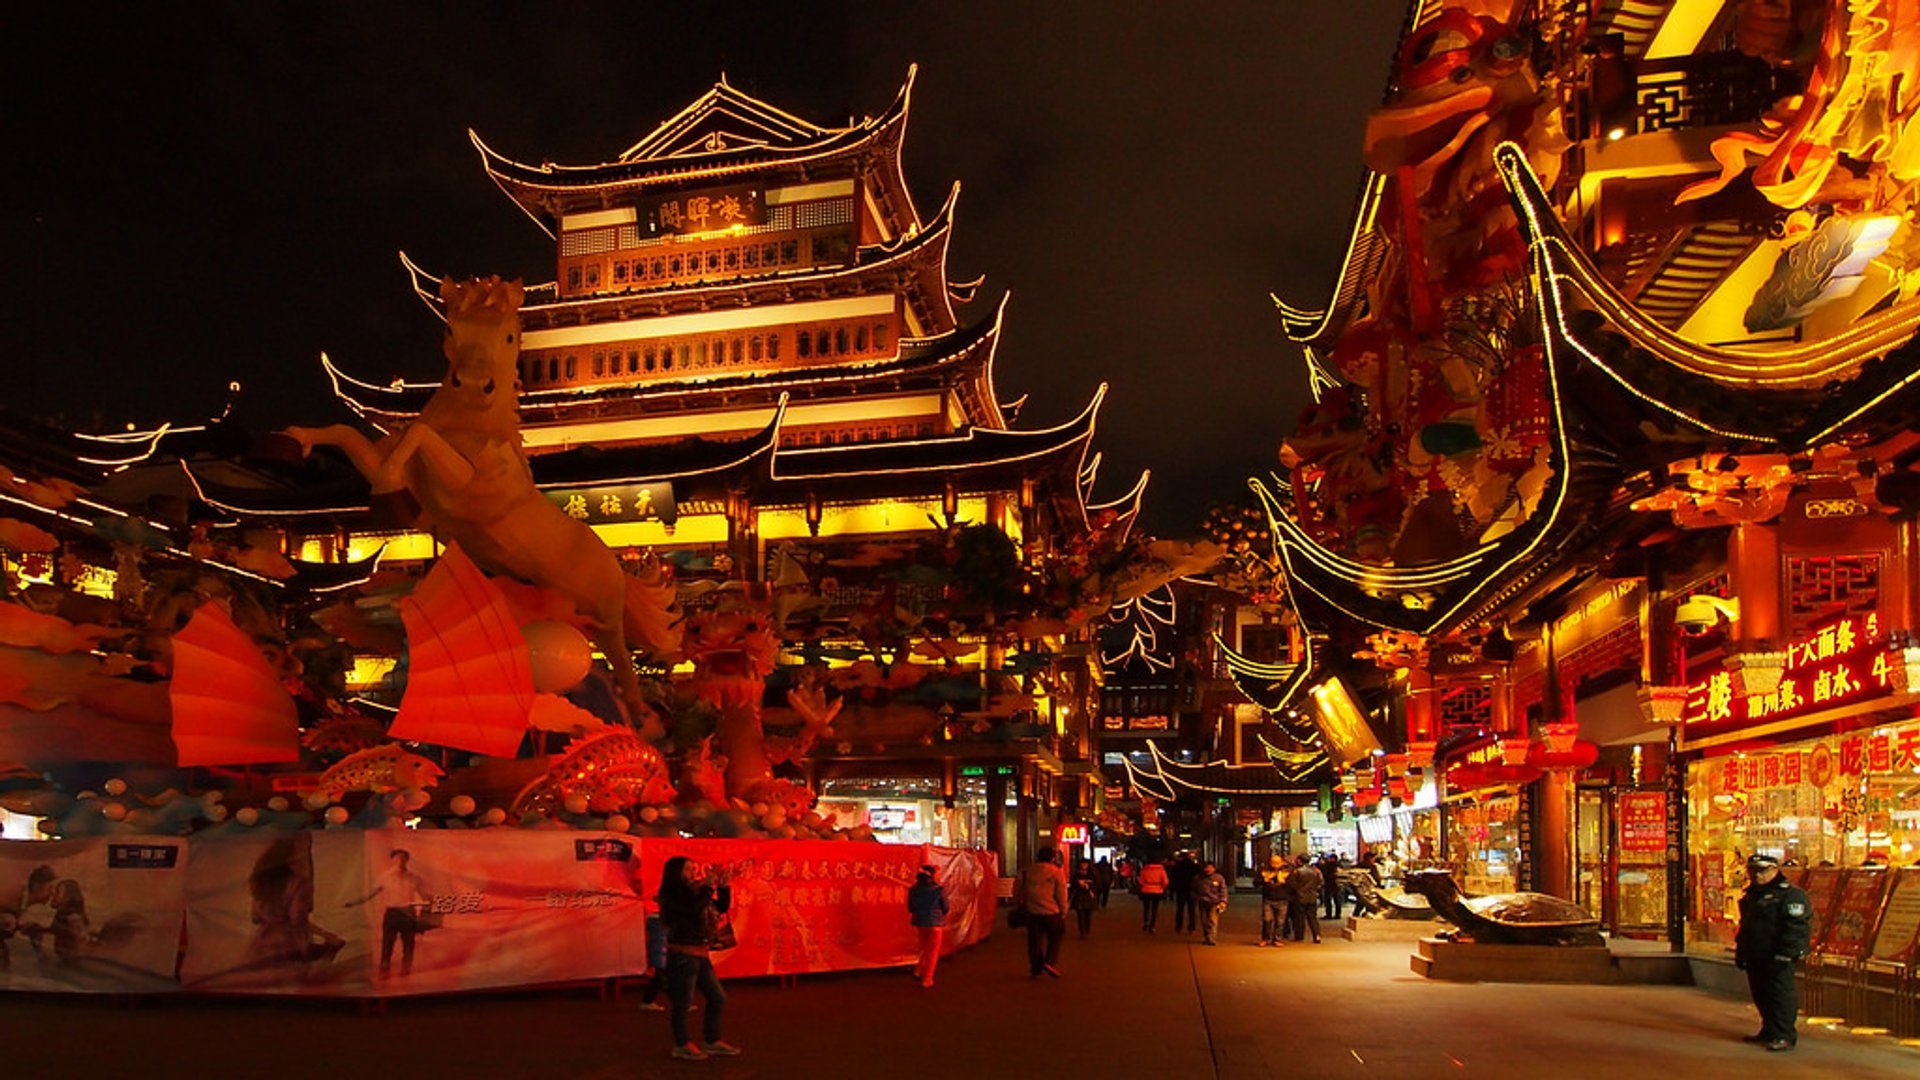 Spring Festival or Chinese New Year 2022 in Shanghai